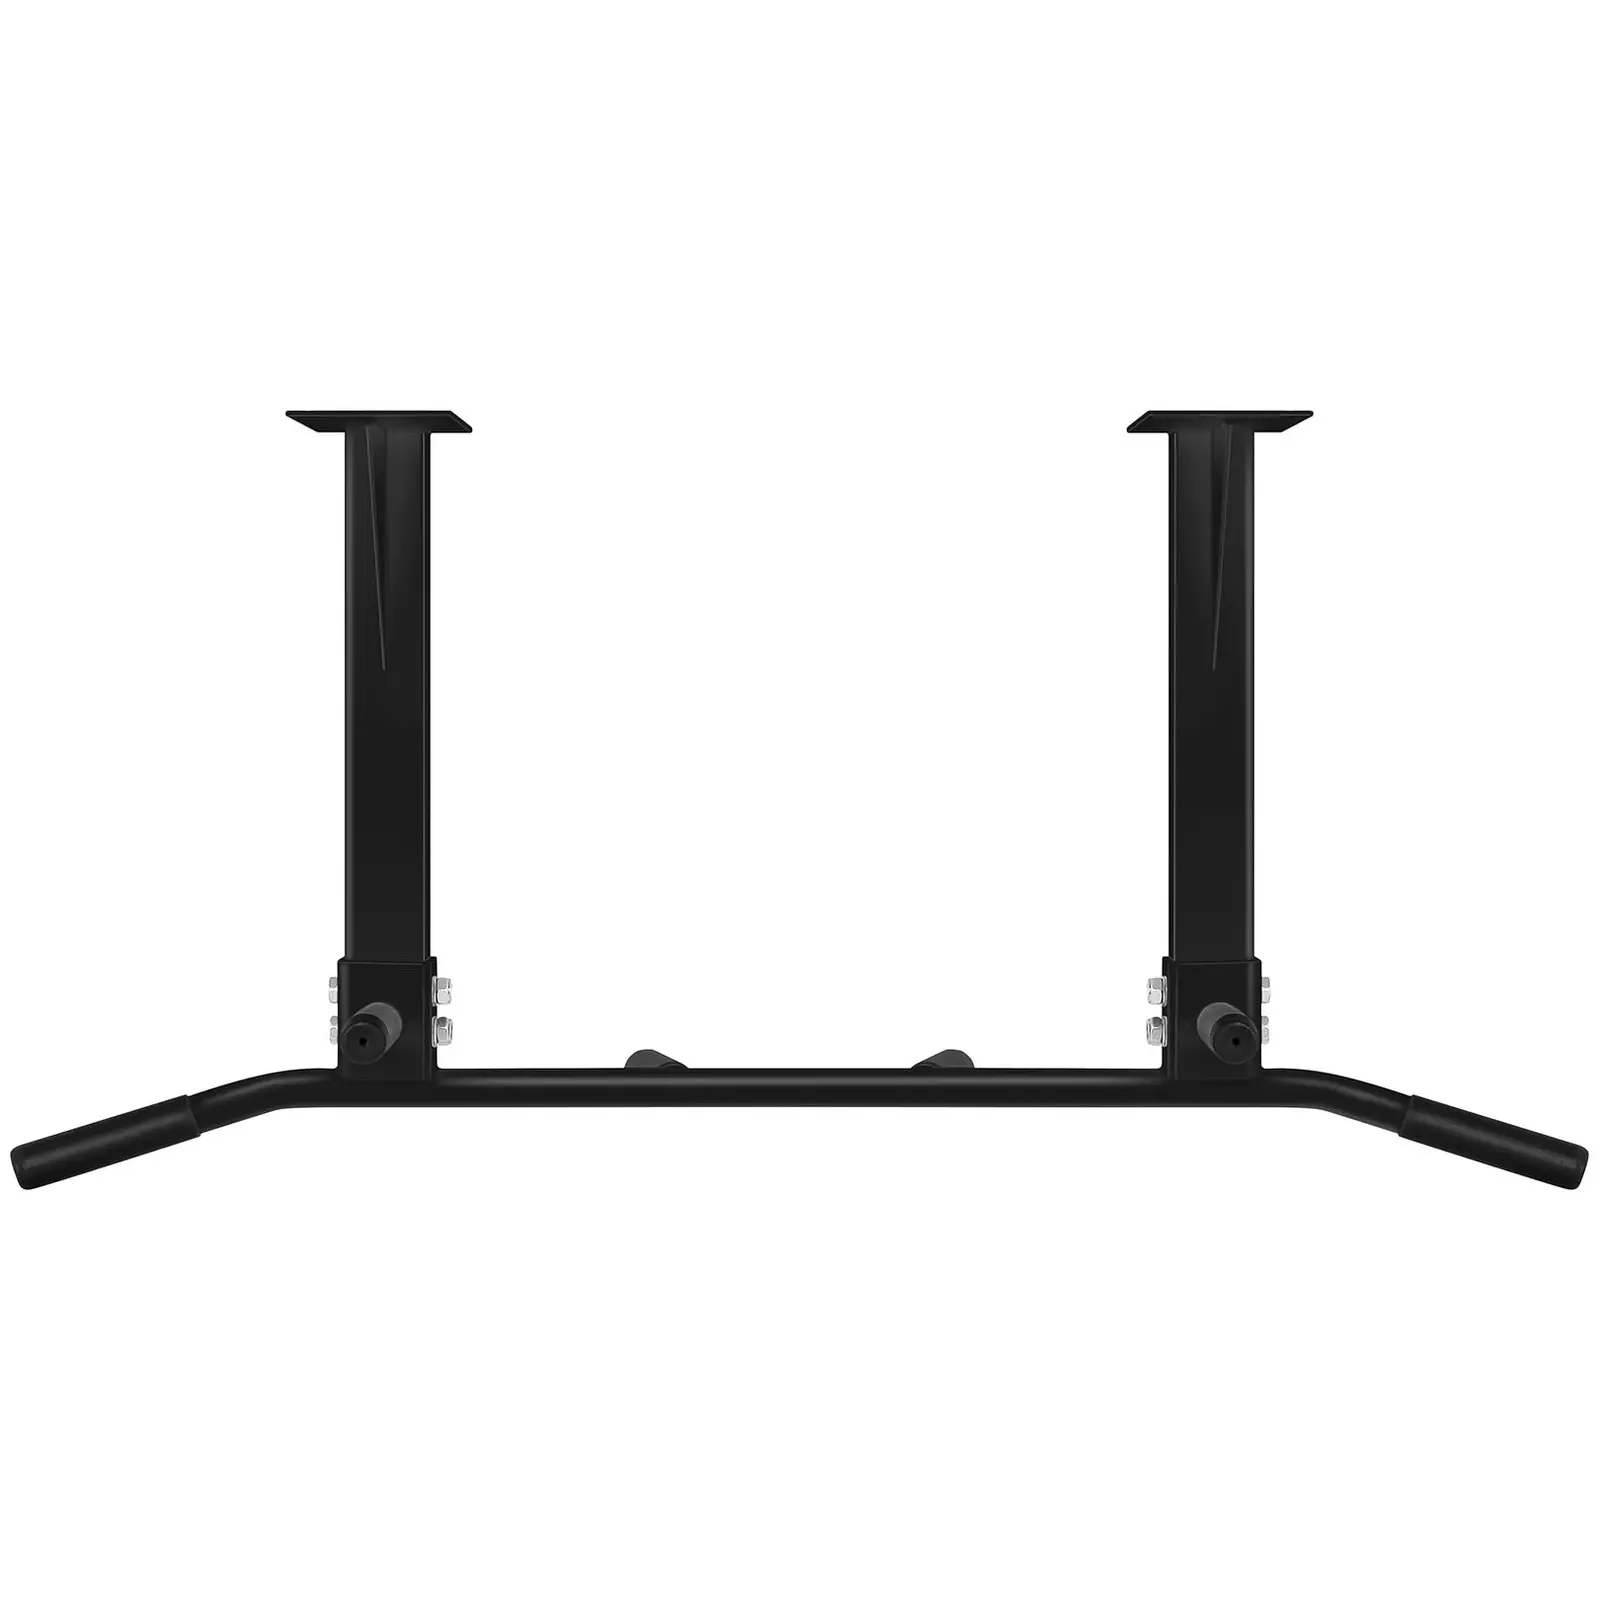 Ceiling-Mounted Pull-Up Bar - black